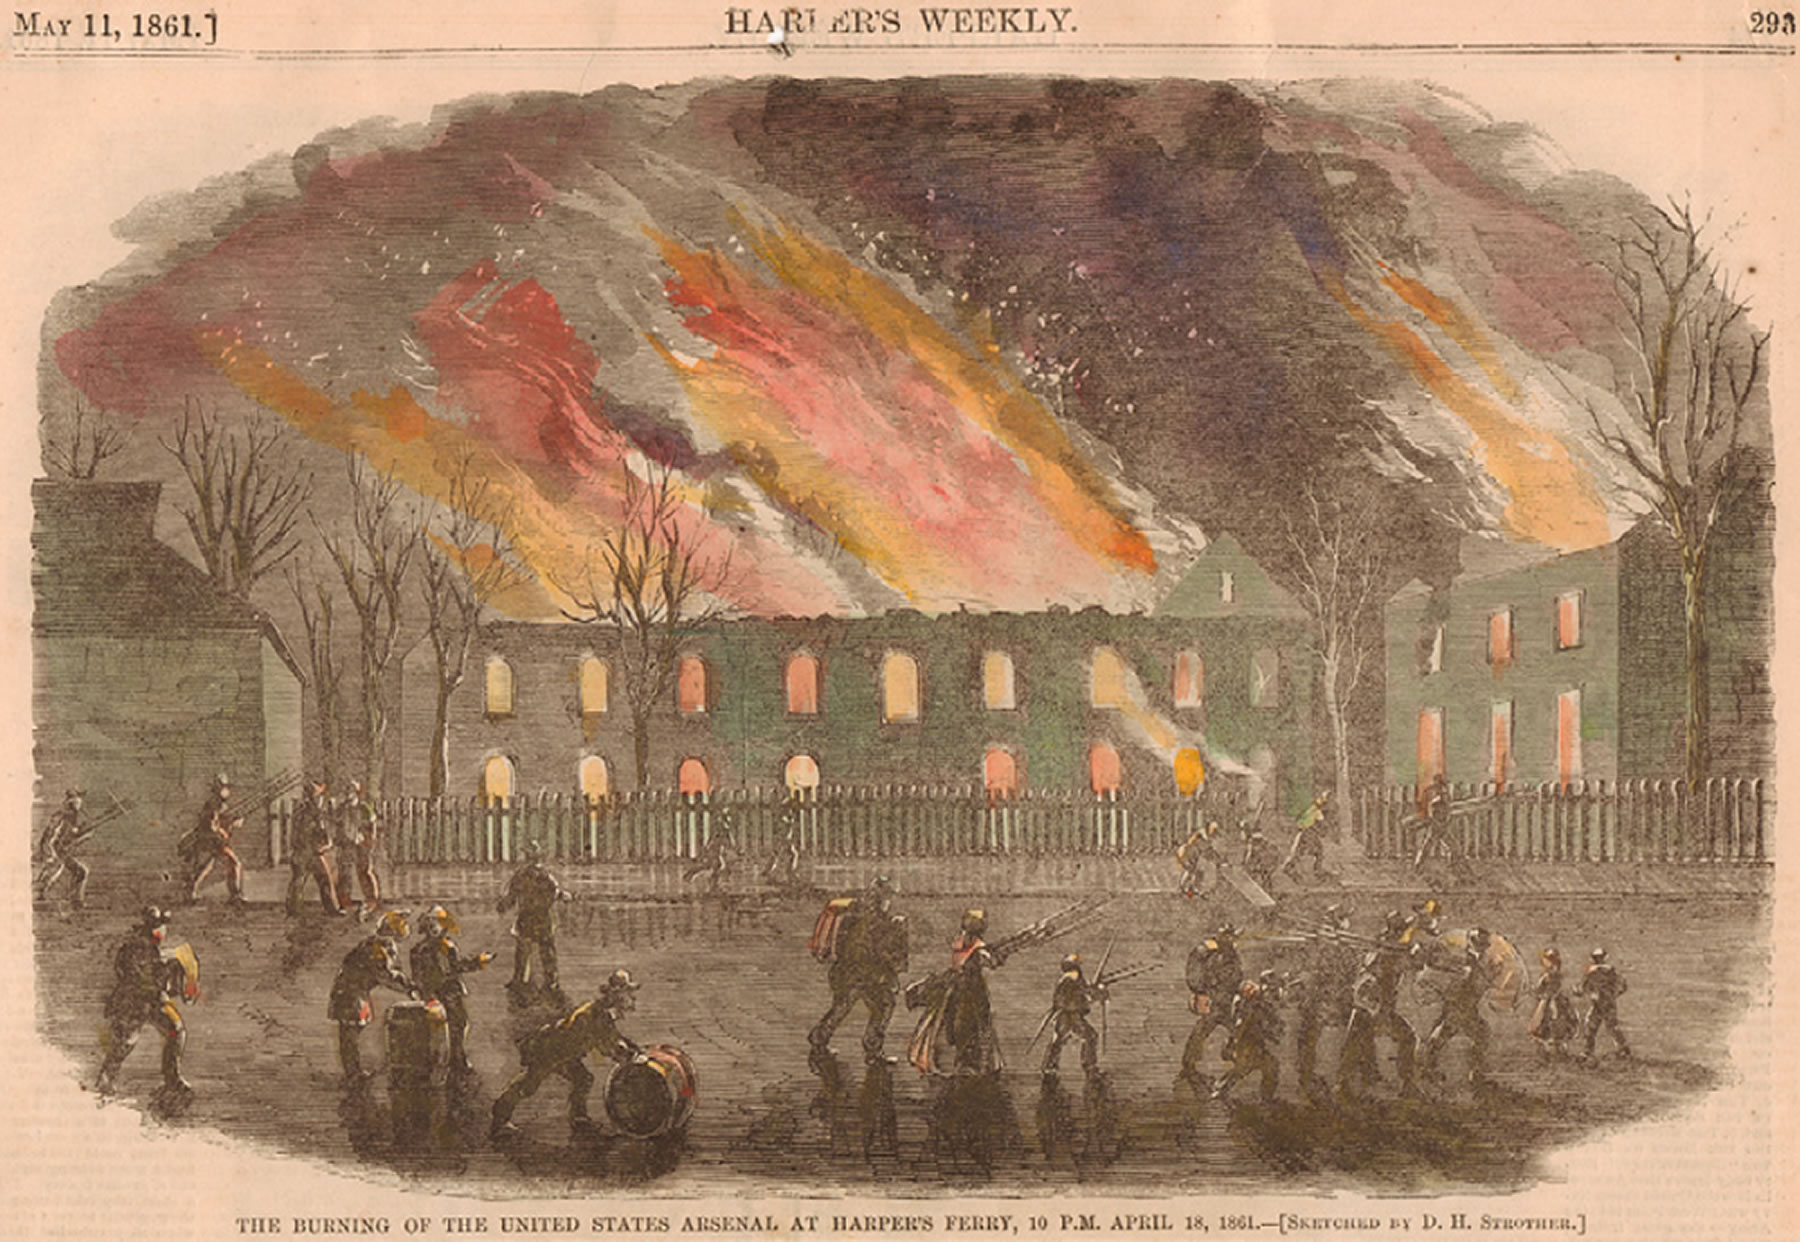 Burning of the arsenal at Harper's Ferry, David Hunter Strother, Harpers Ferry National Historical Park